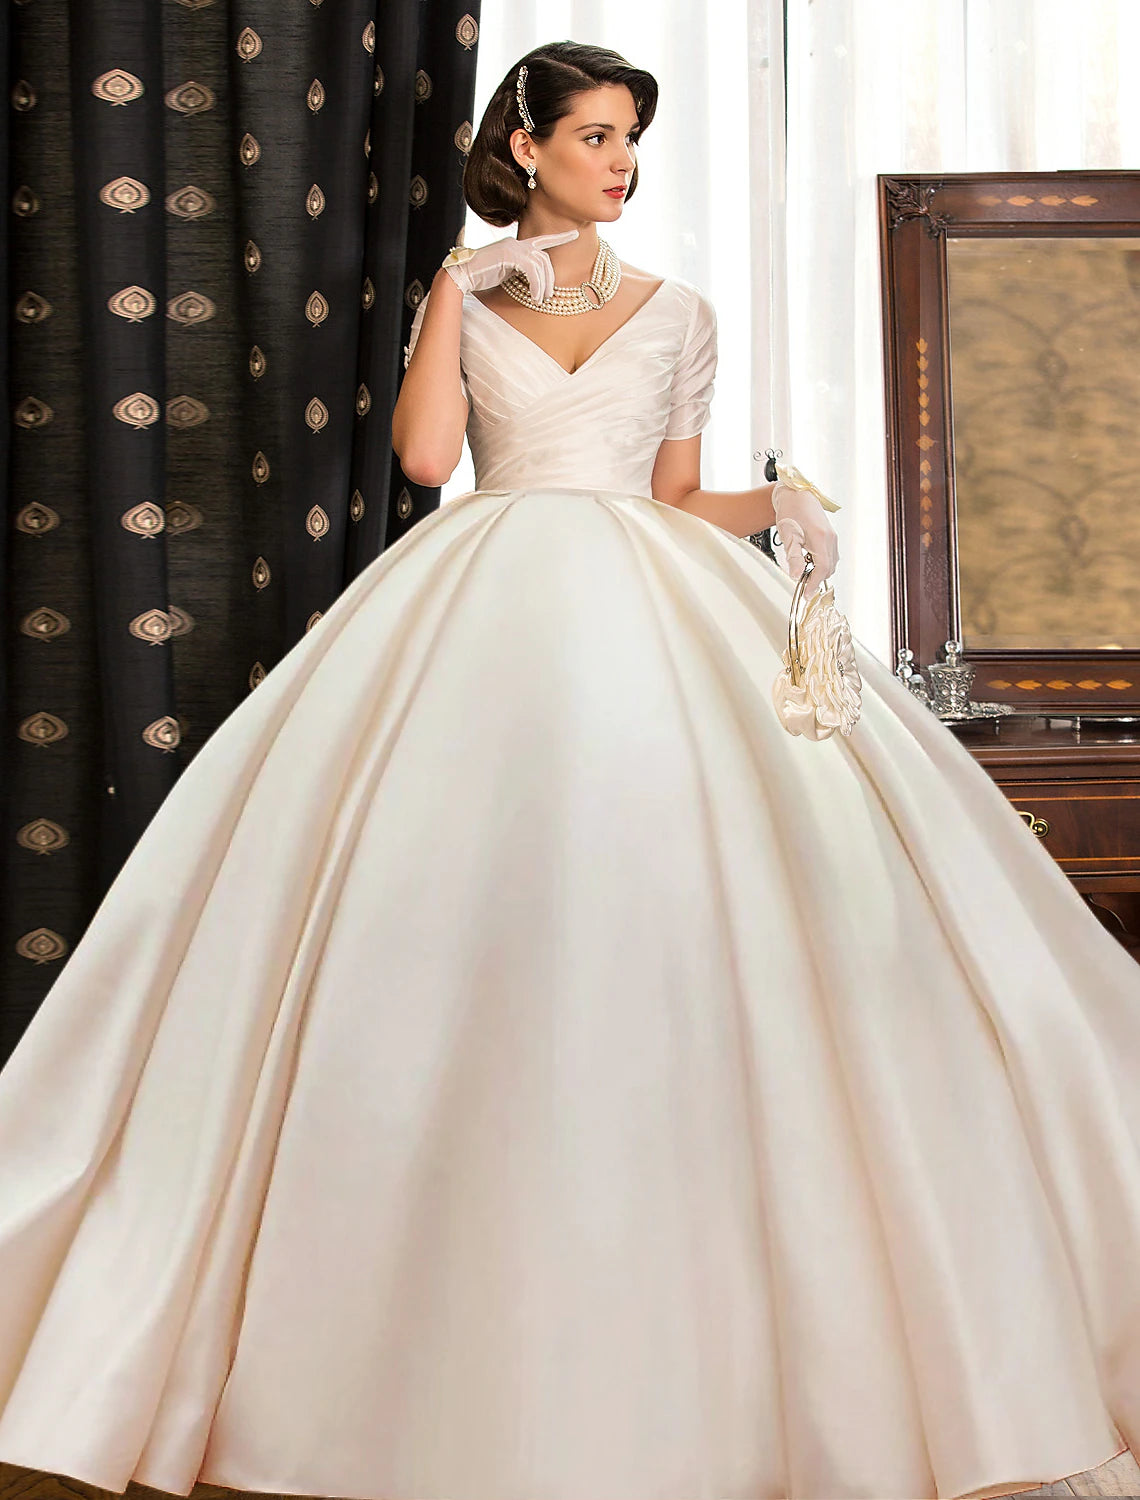 Engagement Formal Wedding Dresses Ball Gown V Neck Short Sleeve Court Train Satin Bridal Gowns With Ruched Solid Color